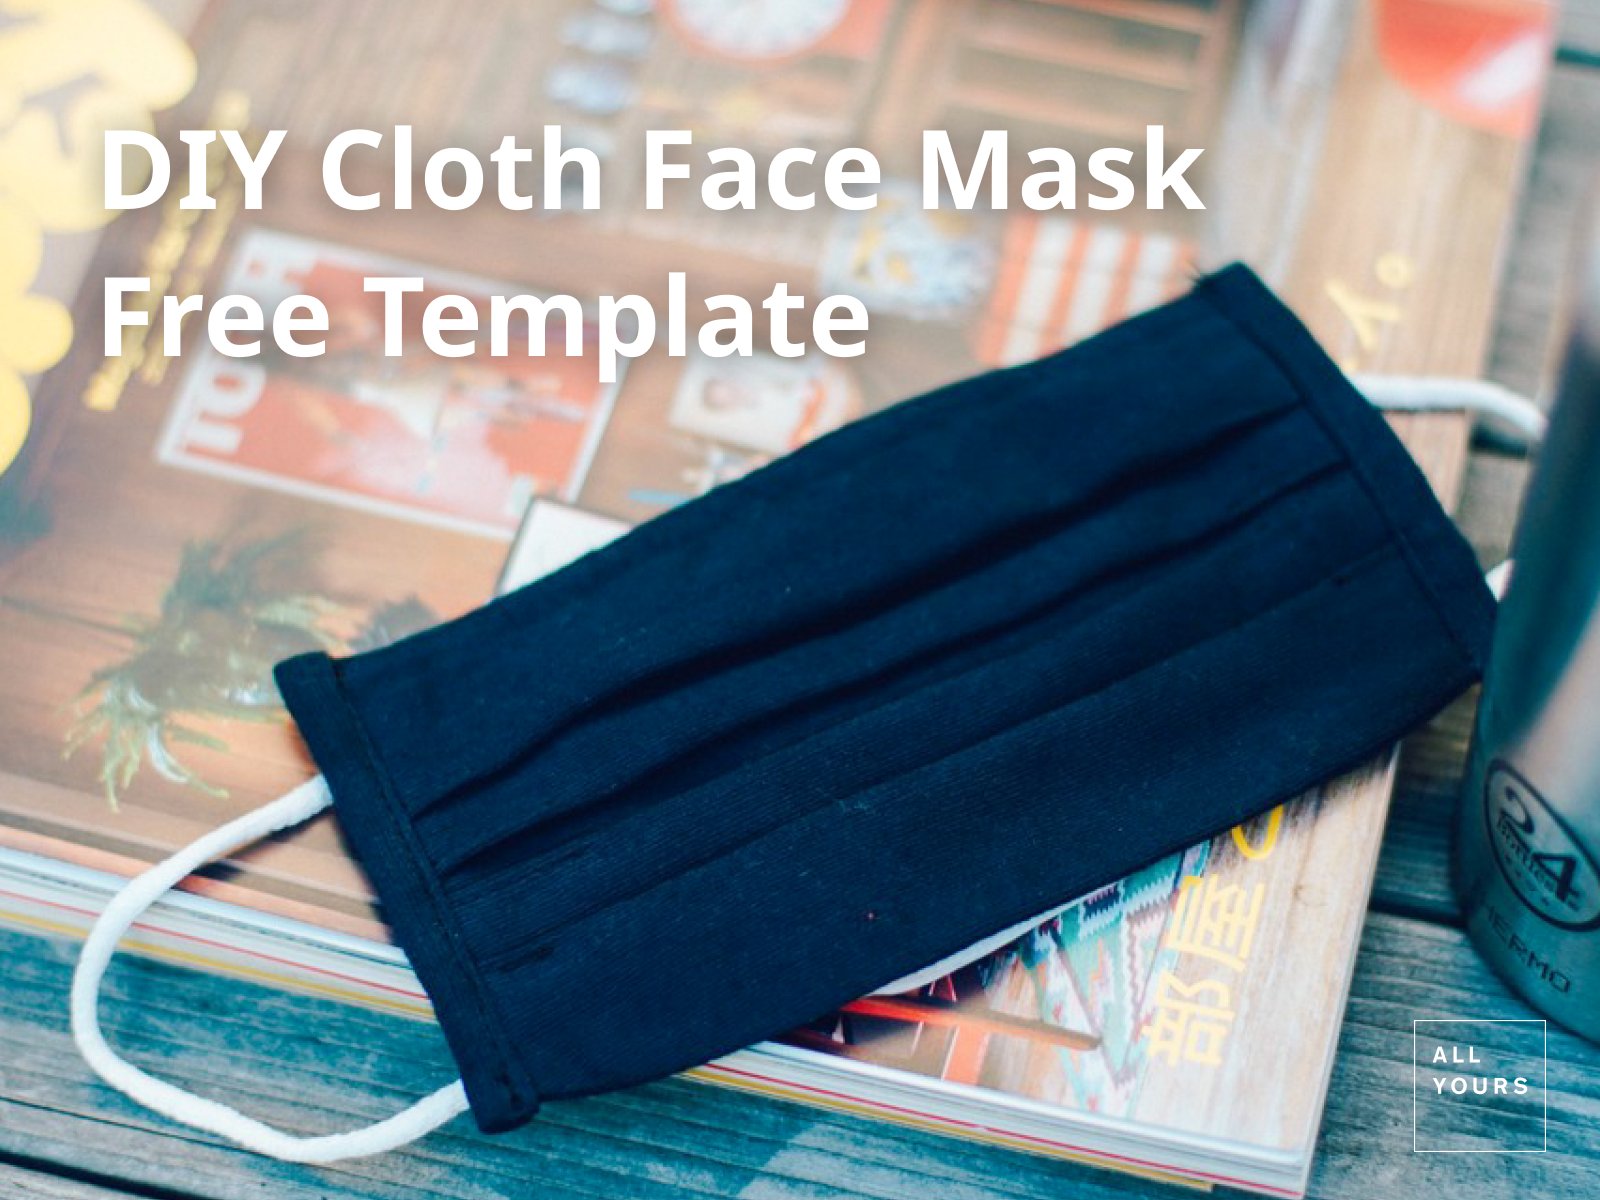 Diy Cloth Face Mask Free Template By All Yours All Yours 公式 オンラインストア 次のあたりまえをつくる人の夢中服